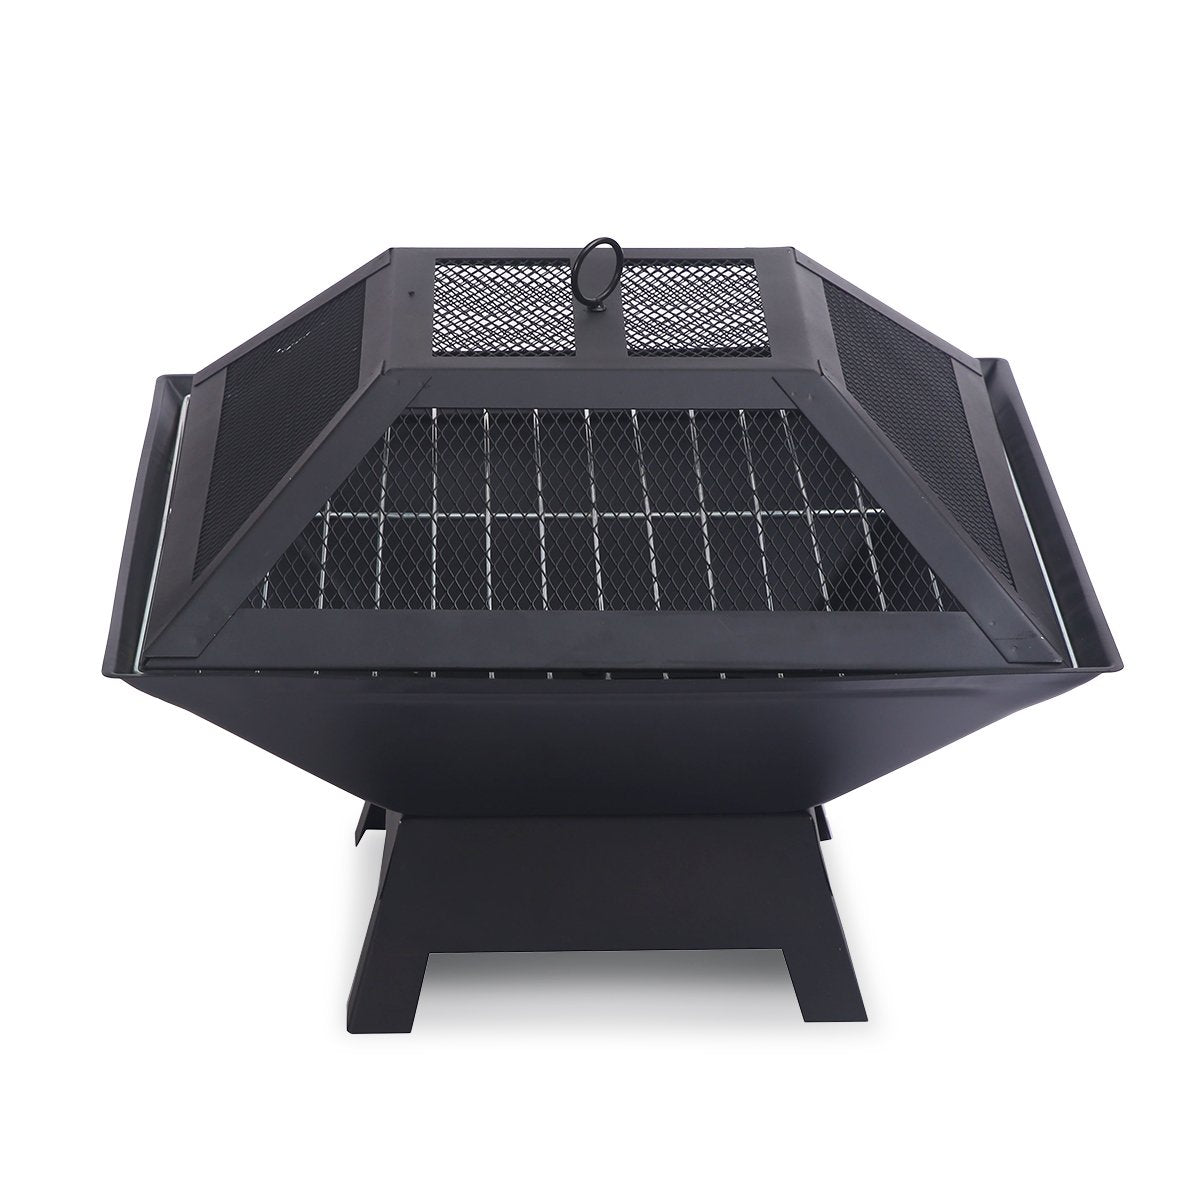 Fire Pit BBQ Portable Grill Cooking Camping Outdoor